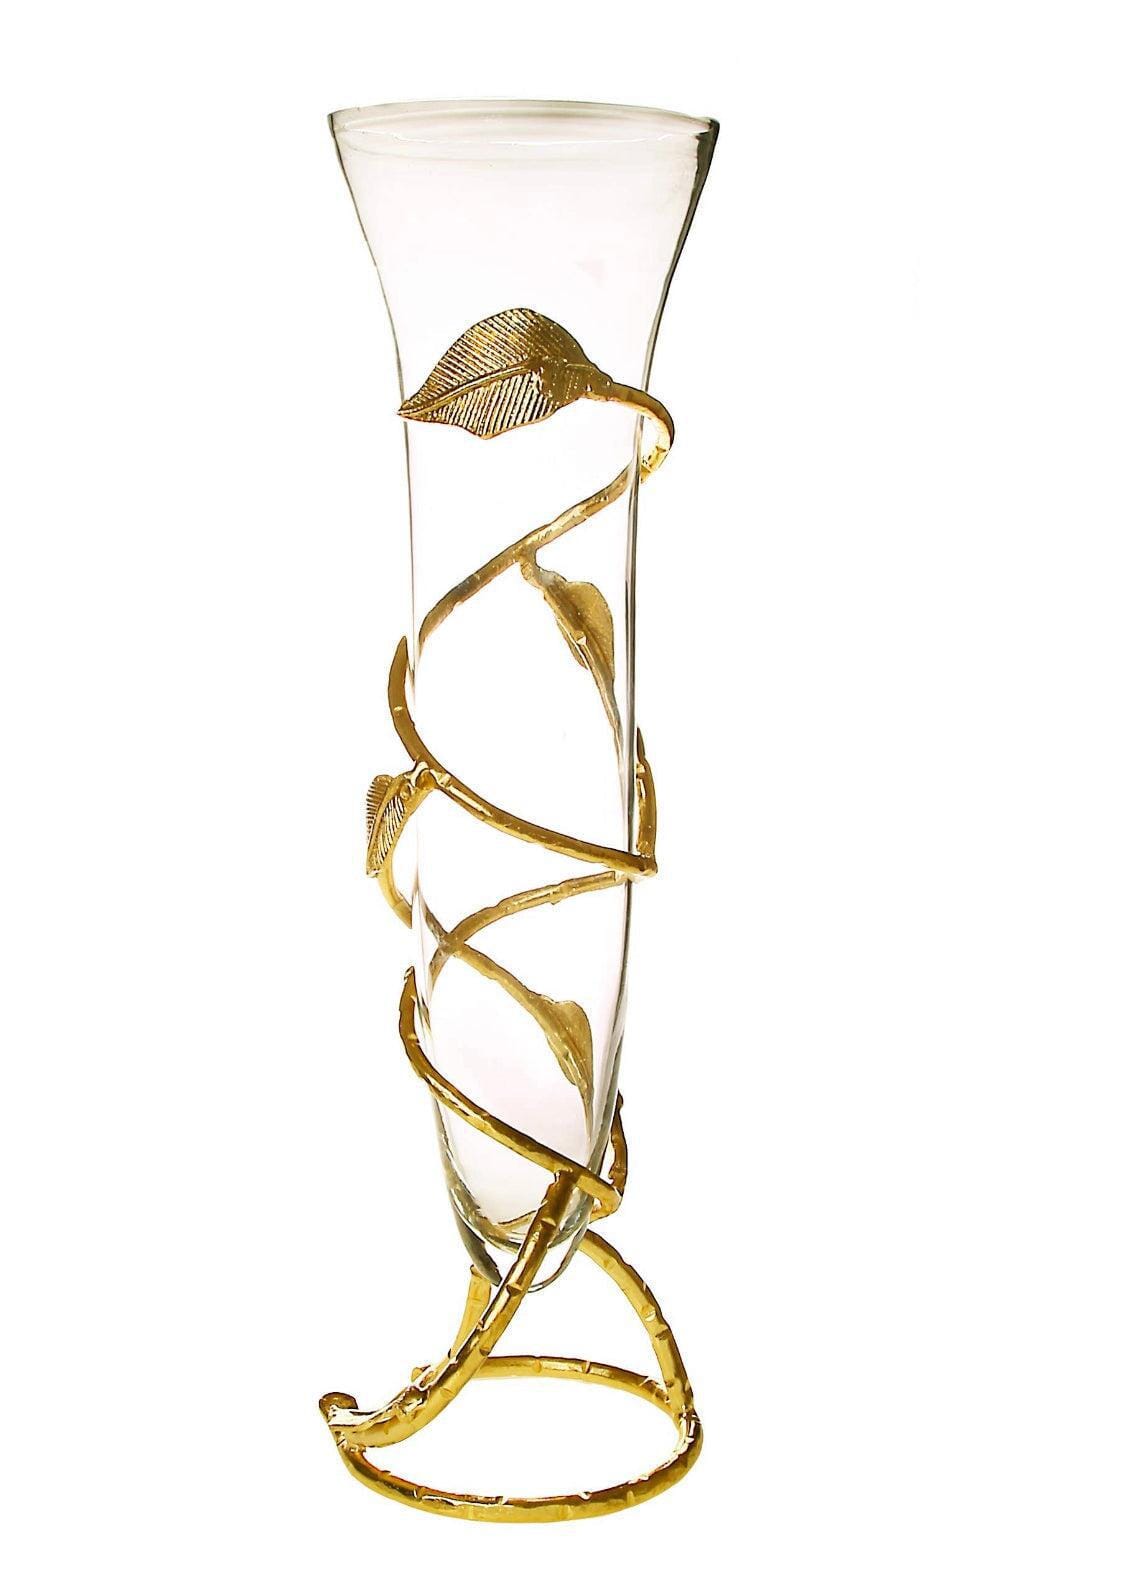 Gold Leaf Vase with Removable Glass Vases High Class Touch - Home Decor Transparent vase 